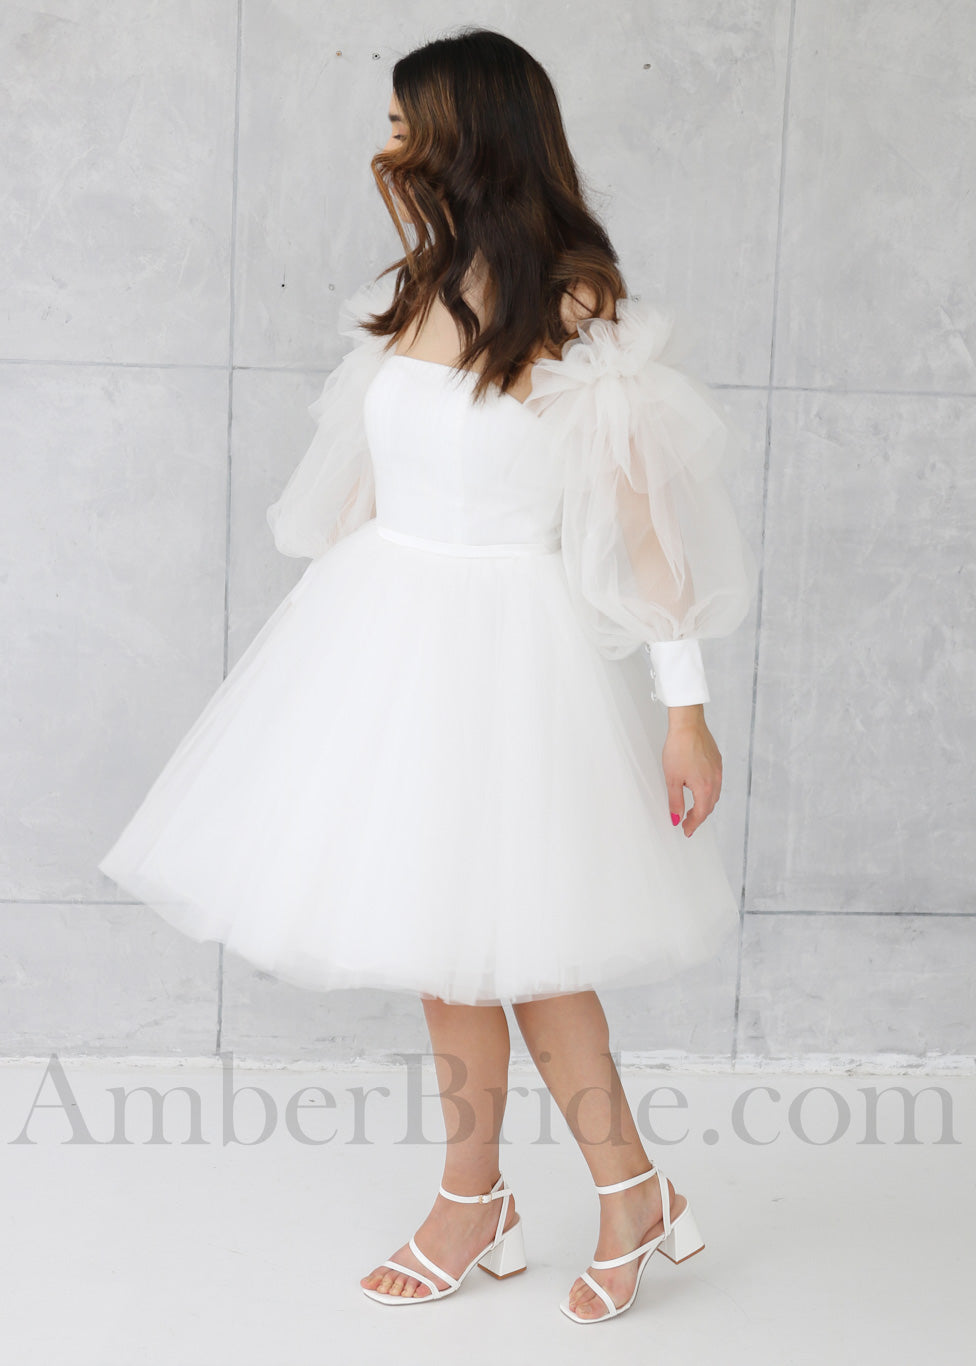 Short Puffy Tulle Dress with Detachable Bishop Sleeves and Corset